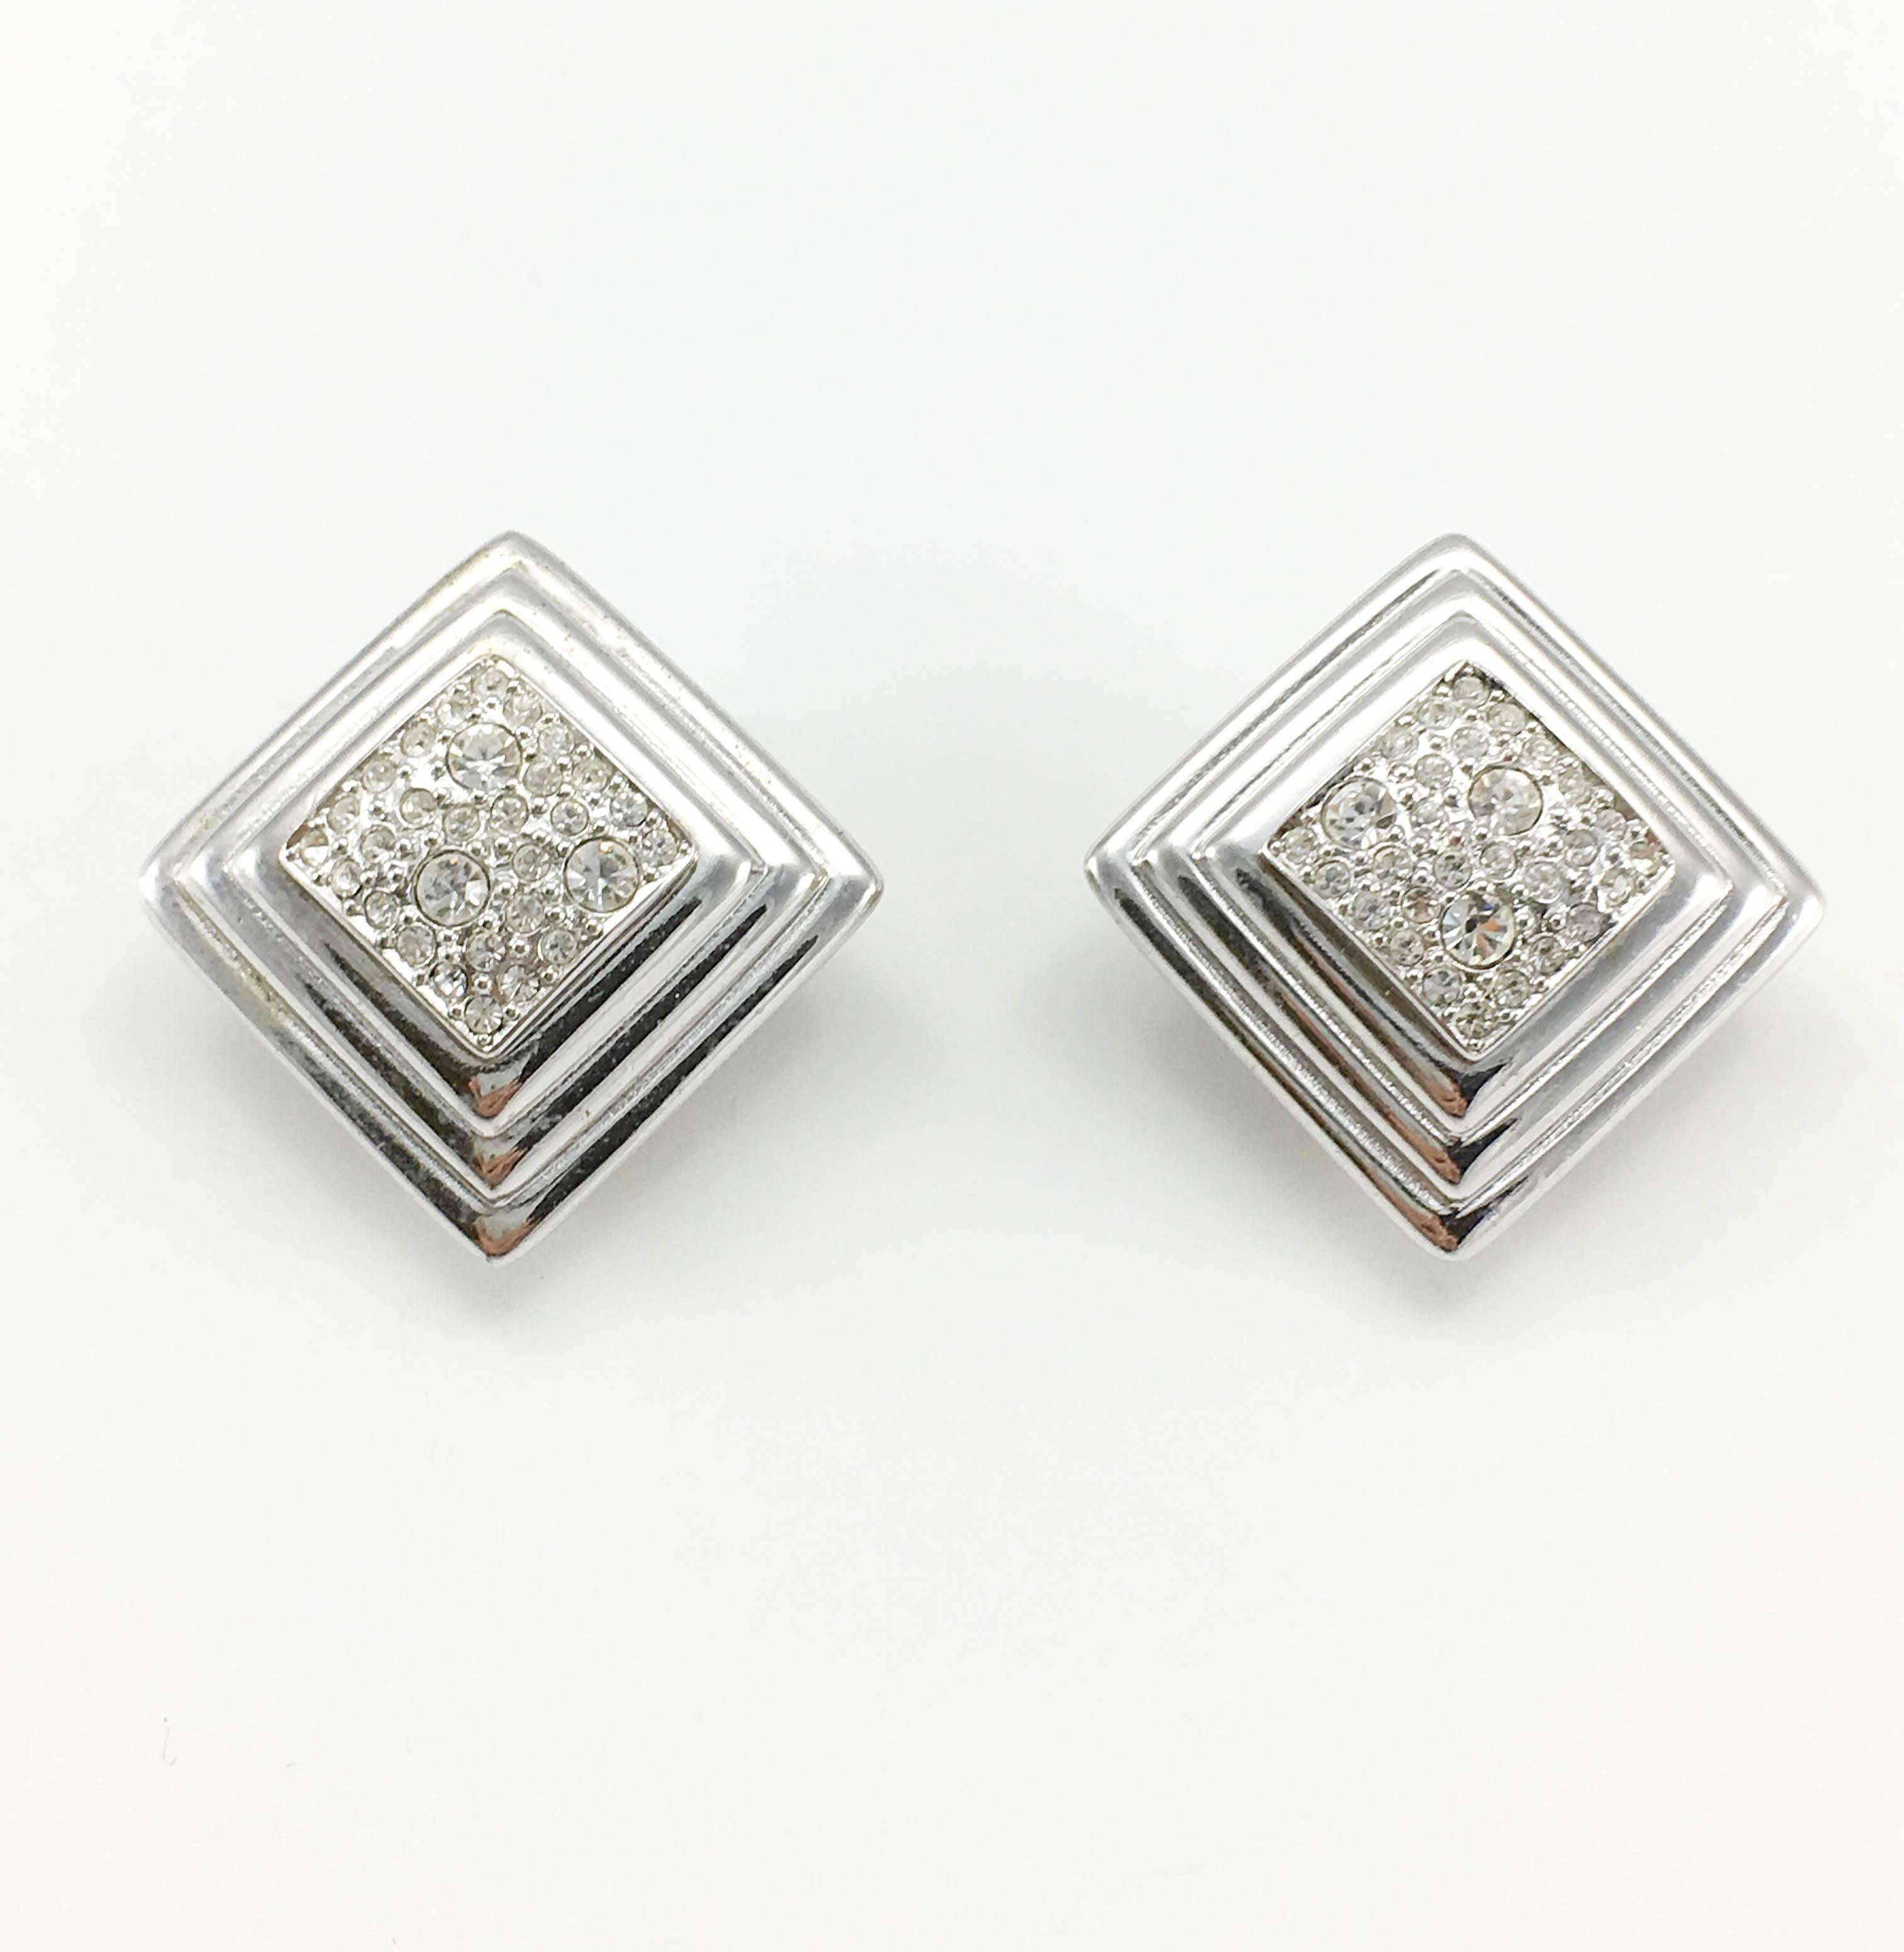 Vintage Dior Geometric Diamanté Clip-On Earrings. These striking 1980’s earrings by Dior are a perfect example of understated luxury. Art Deco inspired, the design consists of stepped lozenges (squares) with a paste/rhinestone encrusted centre.